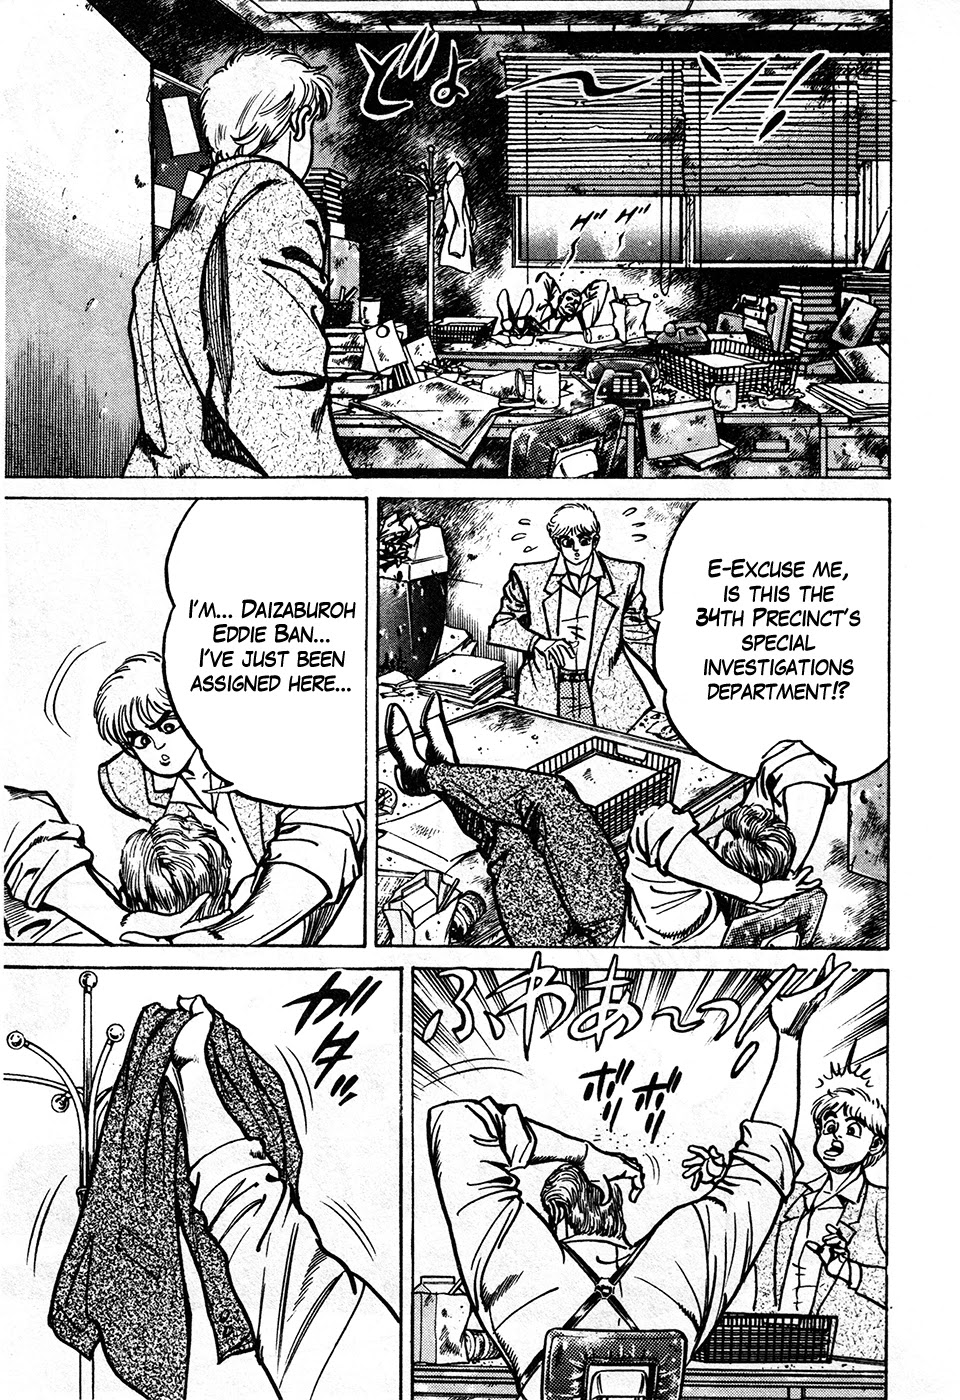 Mad Bull 34 Chapter 39.2: Big Chance, Part 2 - Picture 2